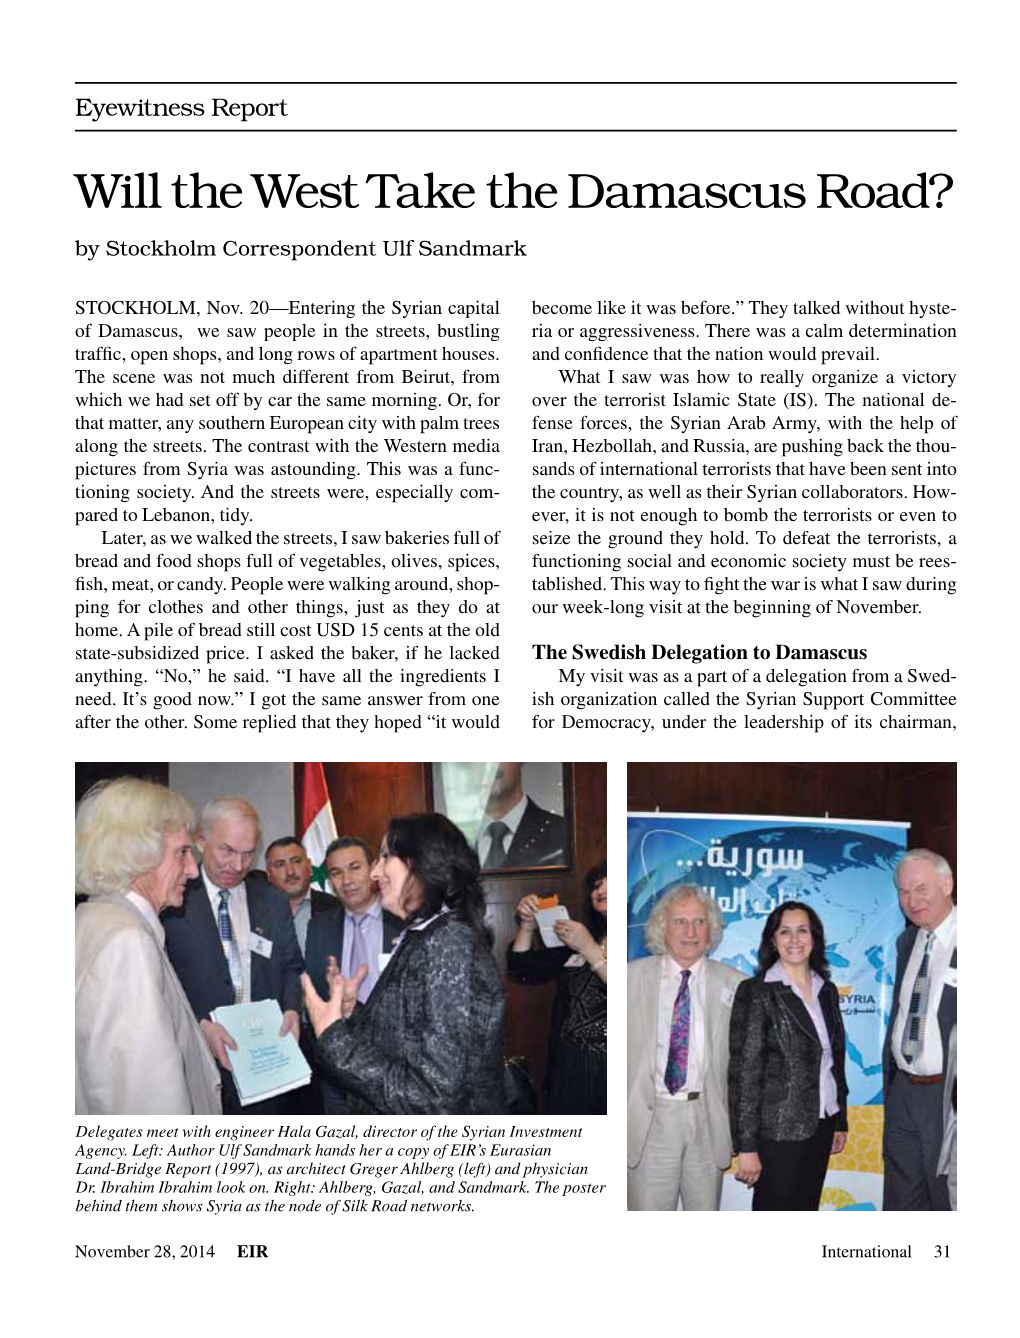 Will the West Take the Damascus Road? by Stockholm Correspondent Ulf Sandmark